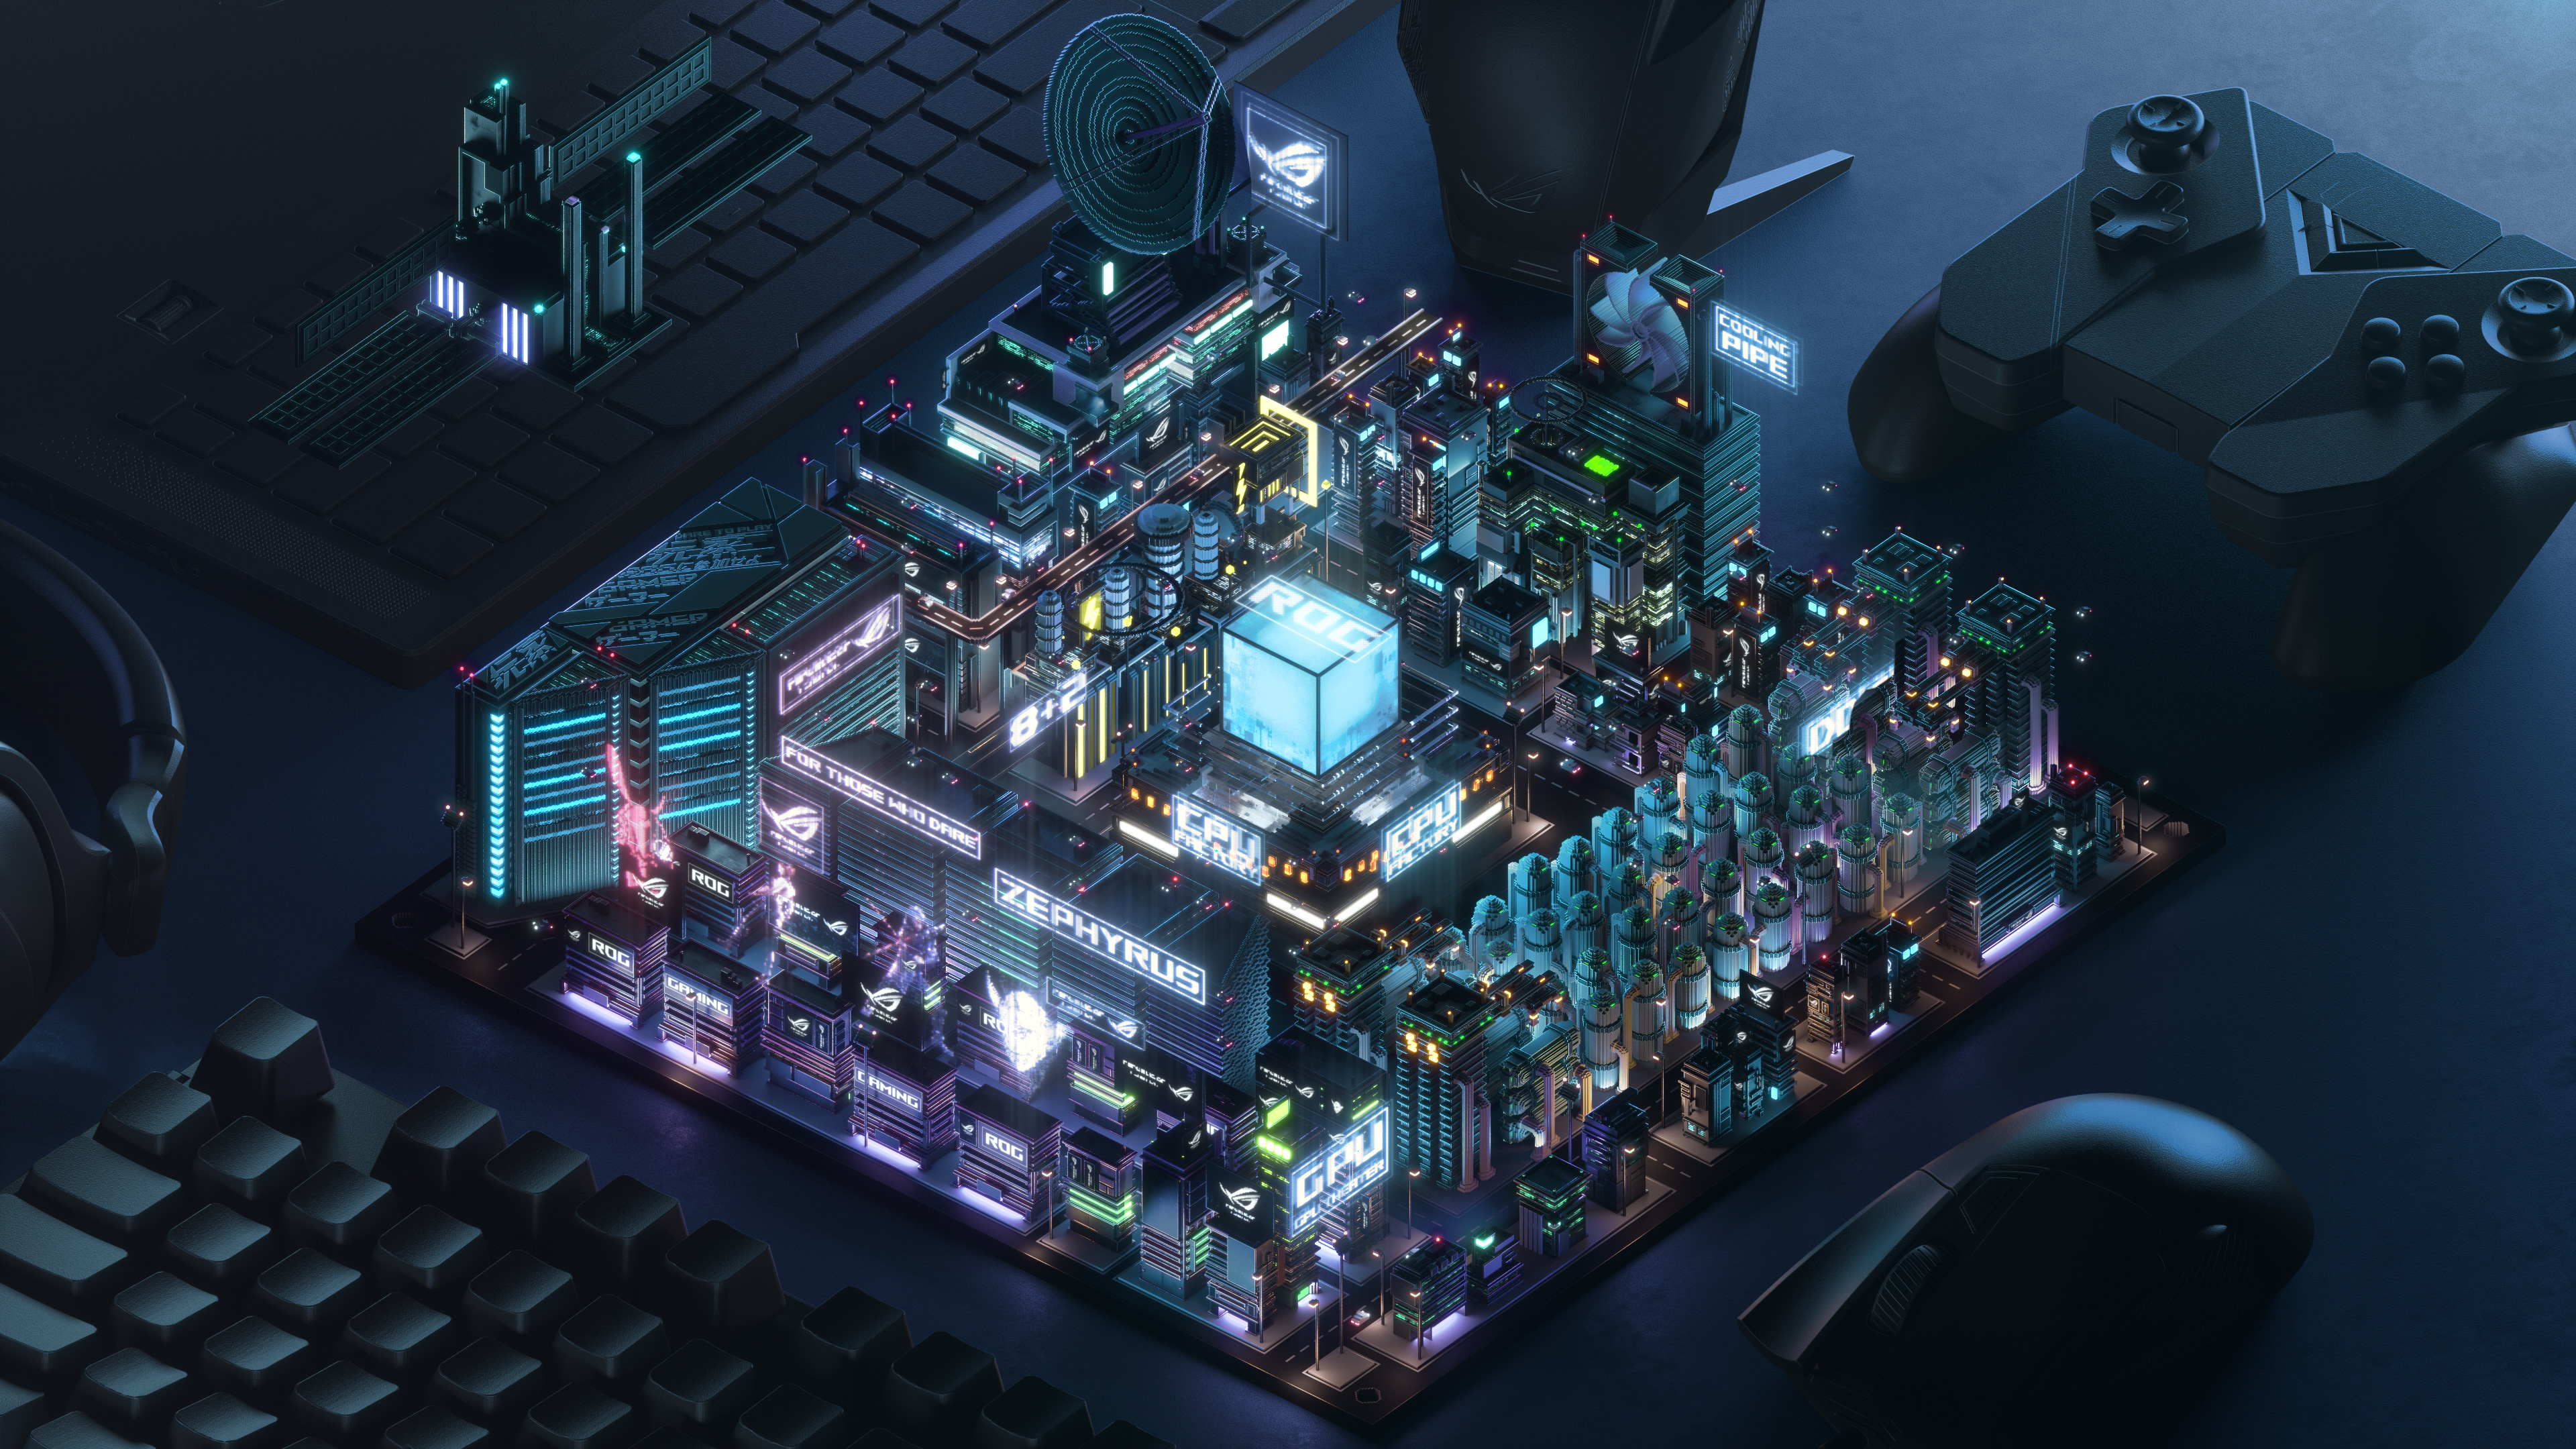 General 3840x2160 motherboards neon neon city Republic of Gamers controllers computer mice keyboards lights technology ASUS PCB